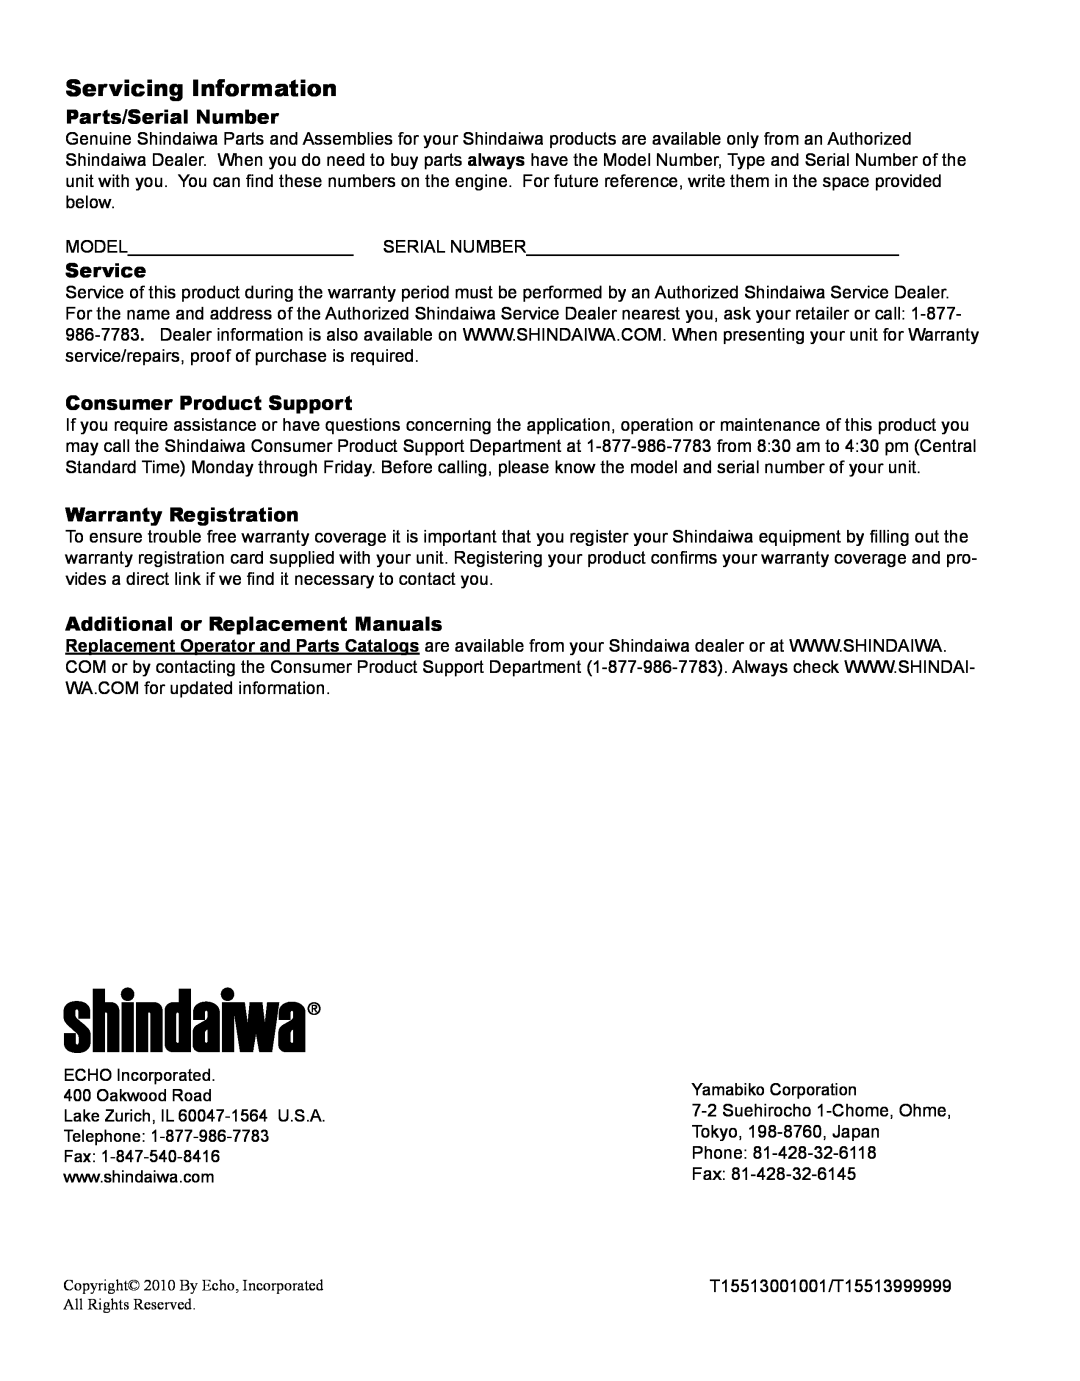 Shindaiwa X7502891200 Servicing Information, Parts/Serial Number, Service, Consumer Product Support, Warranty Registration 